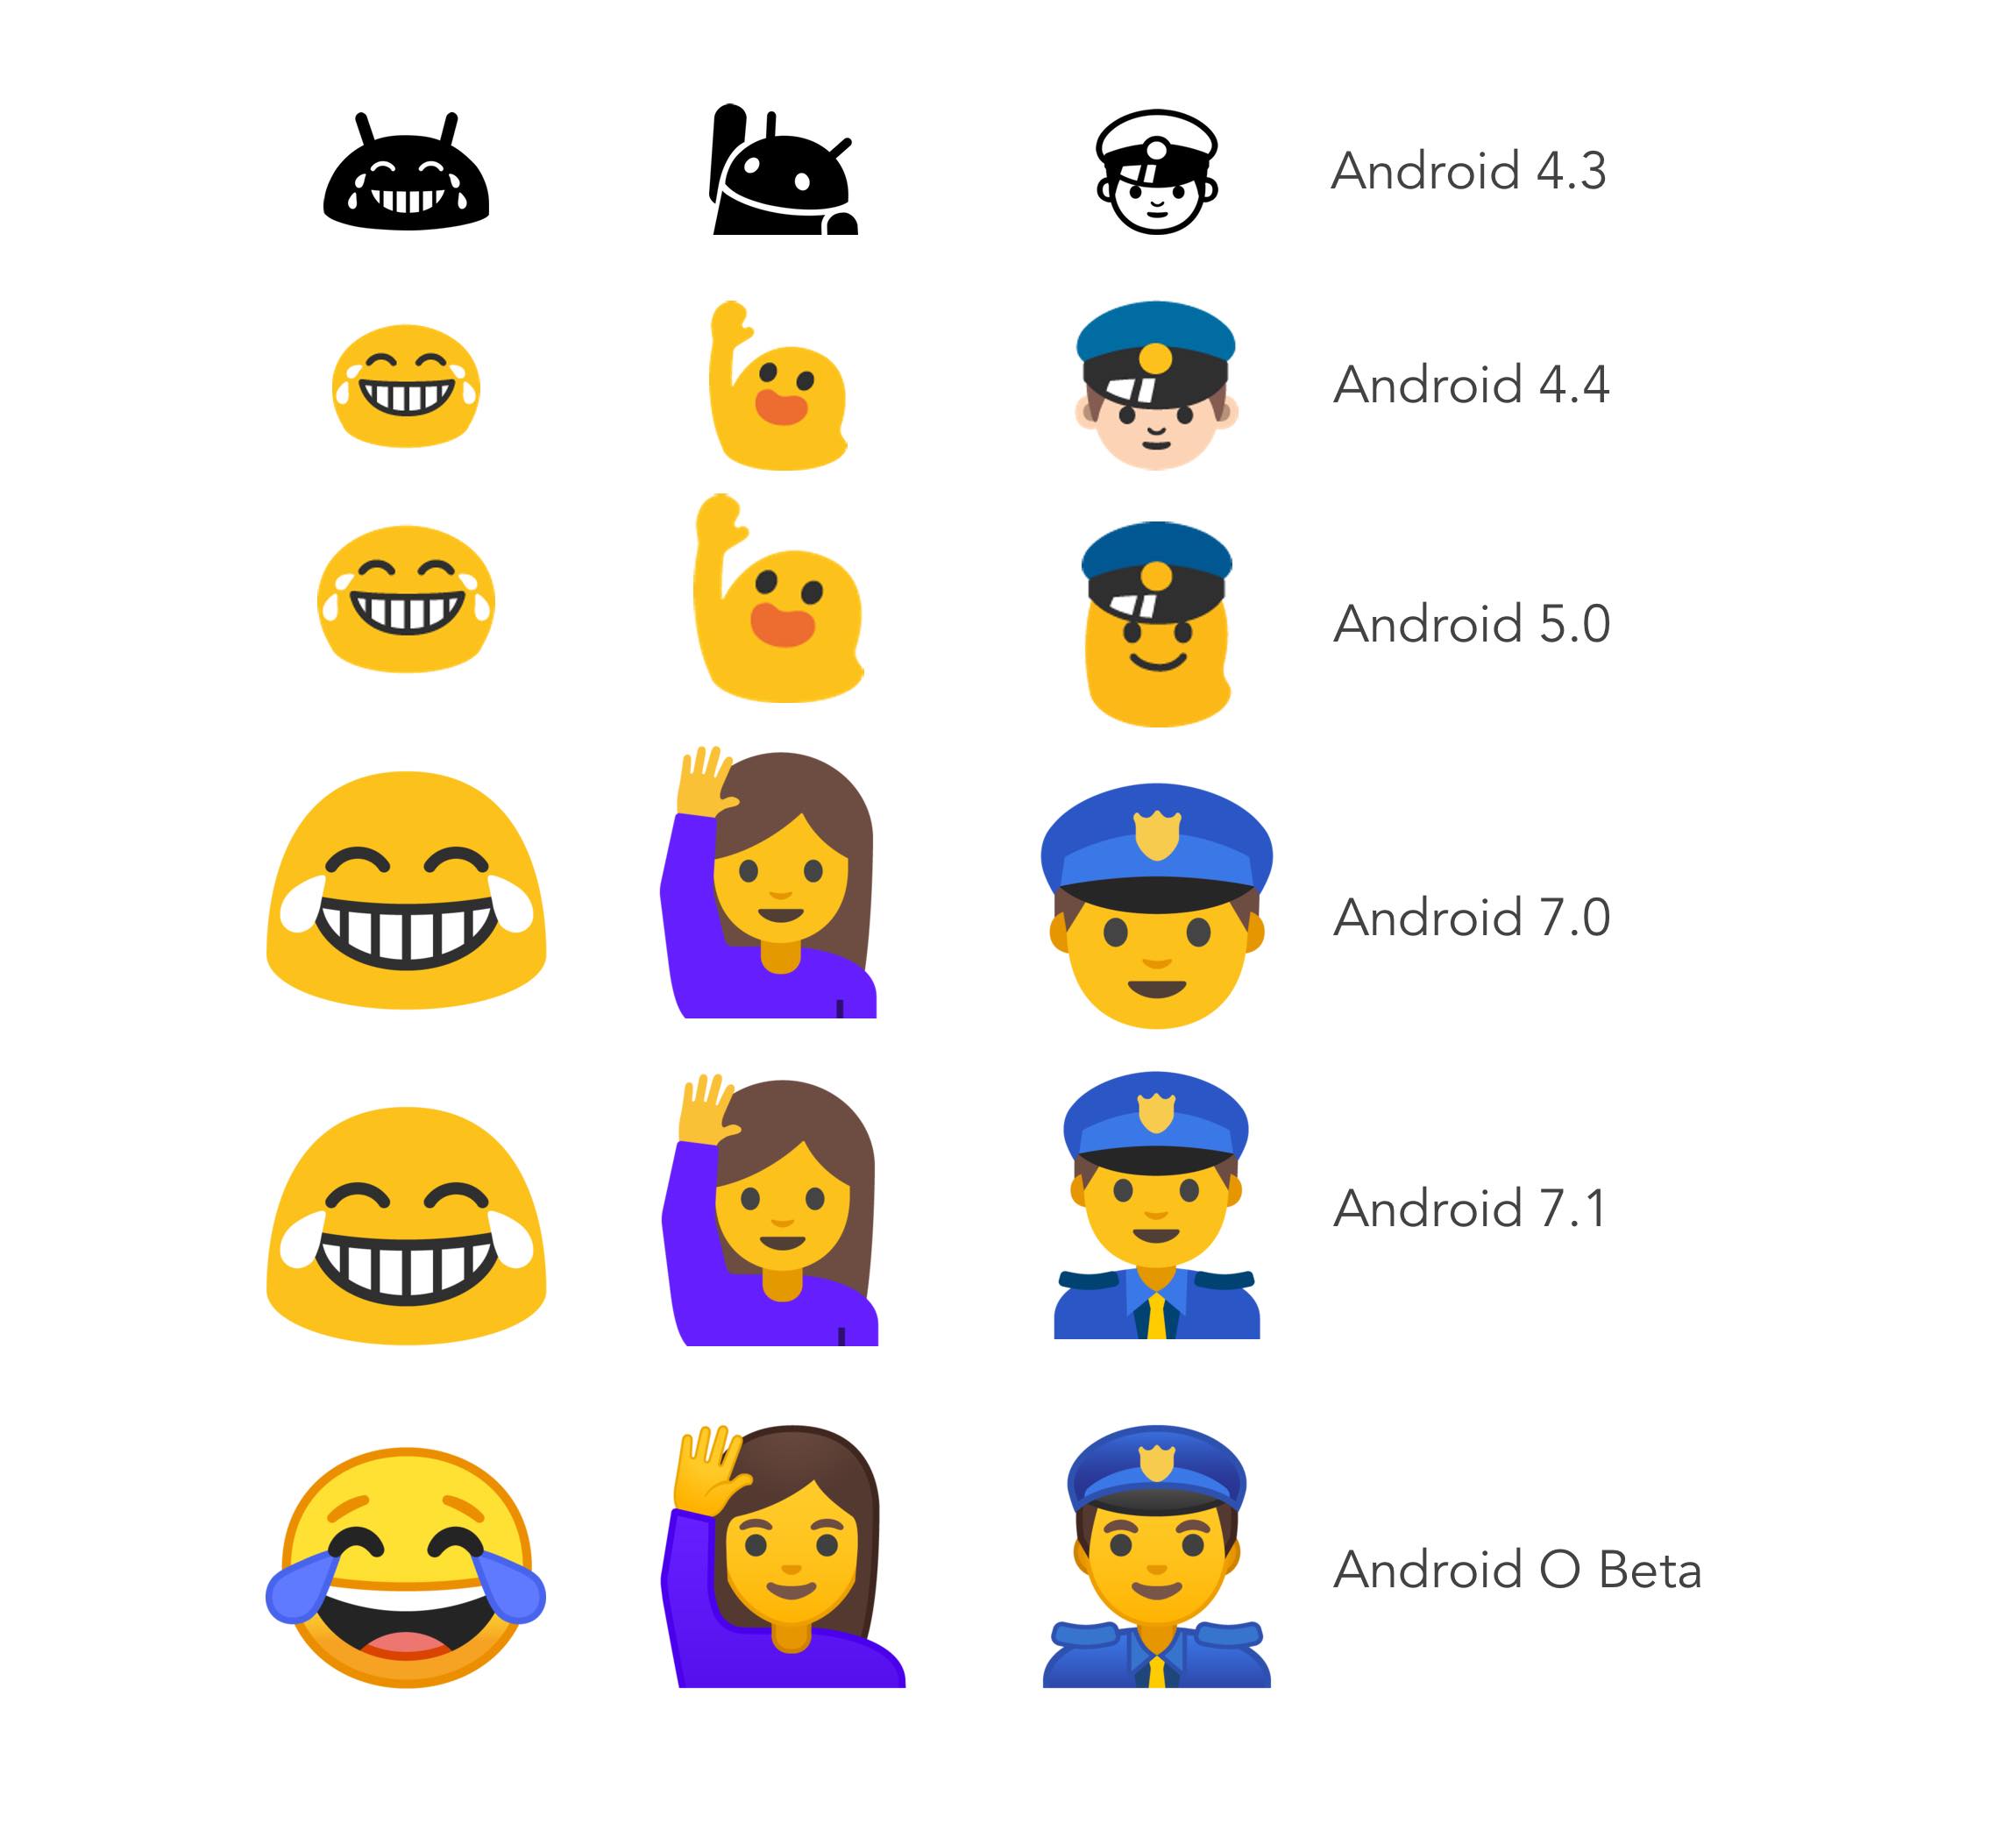 google finally replaces gumdrop blob emojis with circular ones in android o 515833 5